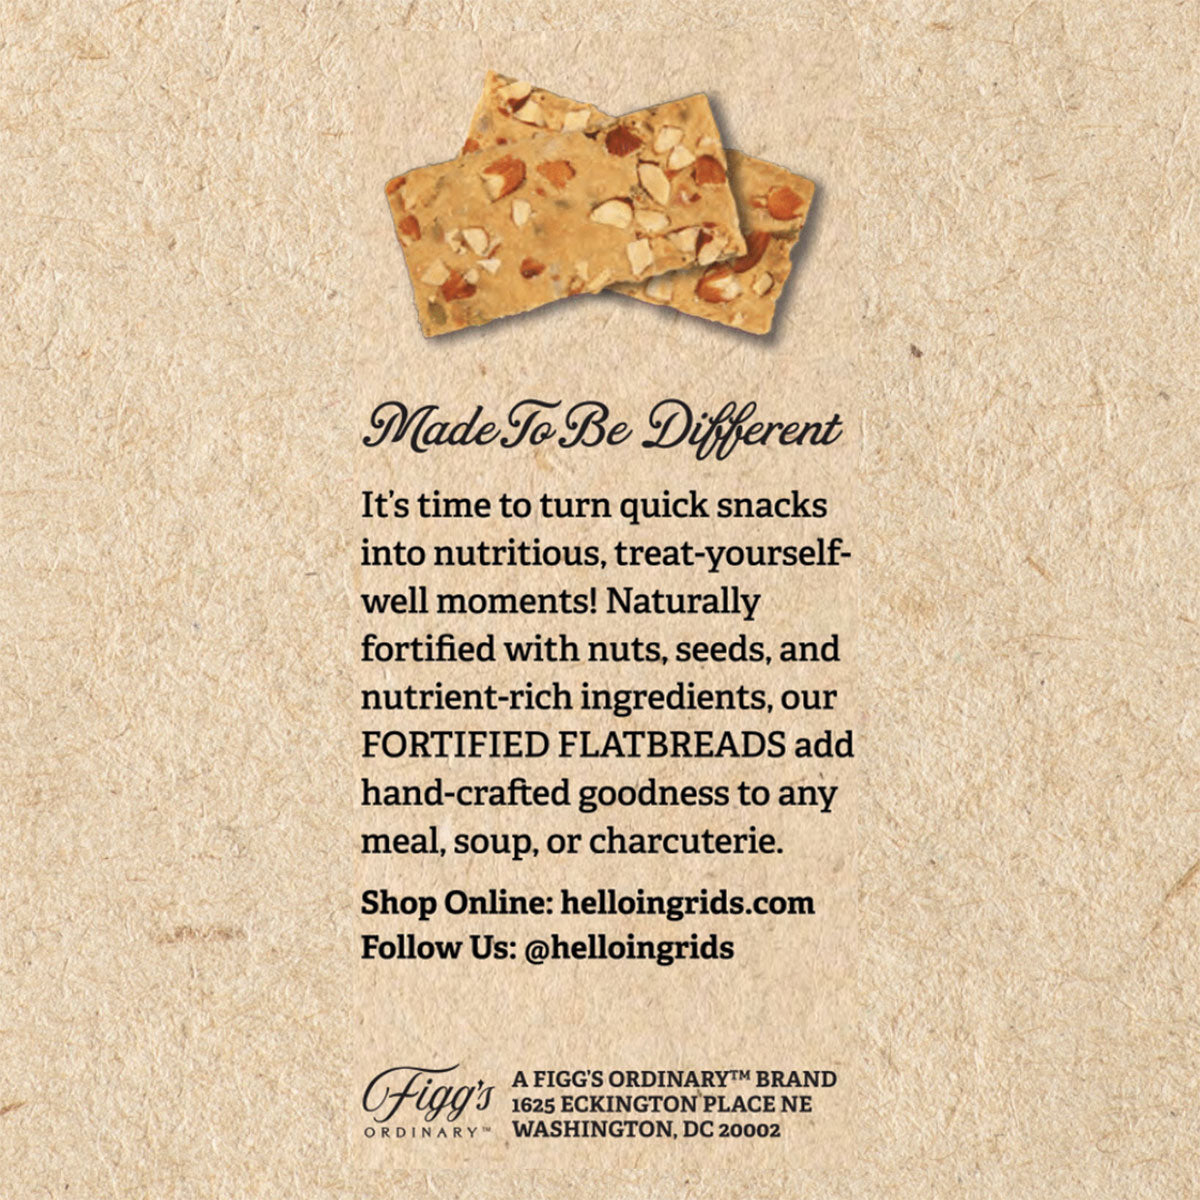 Graphic of the side of the Almond & Sea Salt fortified flatbread packaging sharing their history, and where to shop